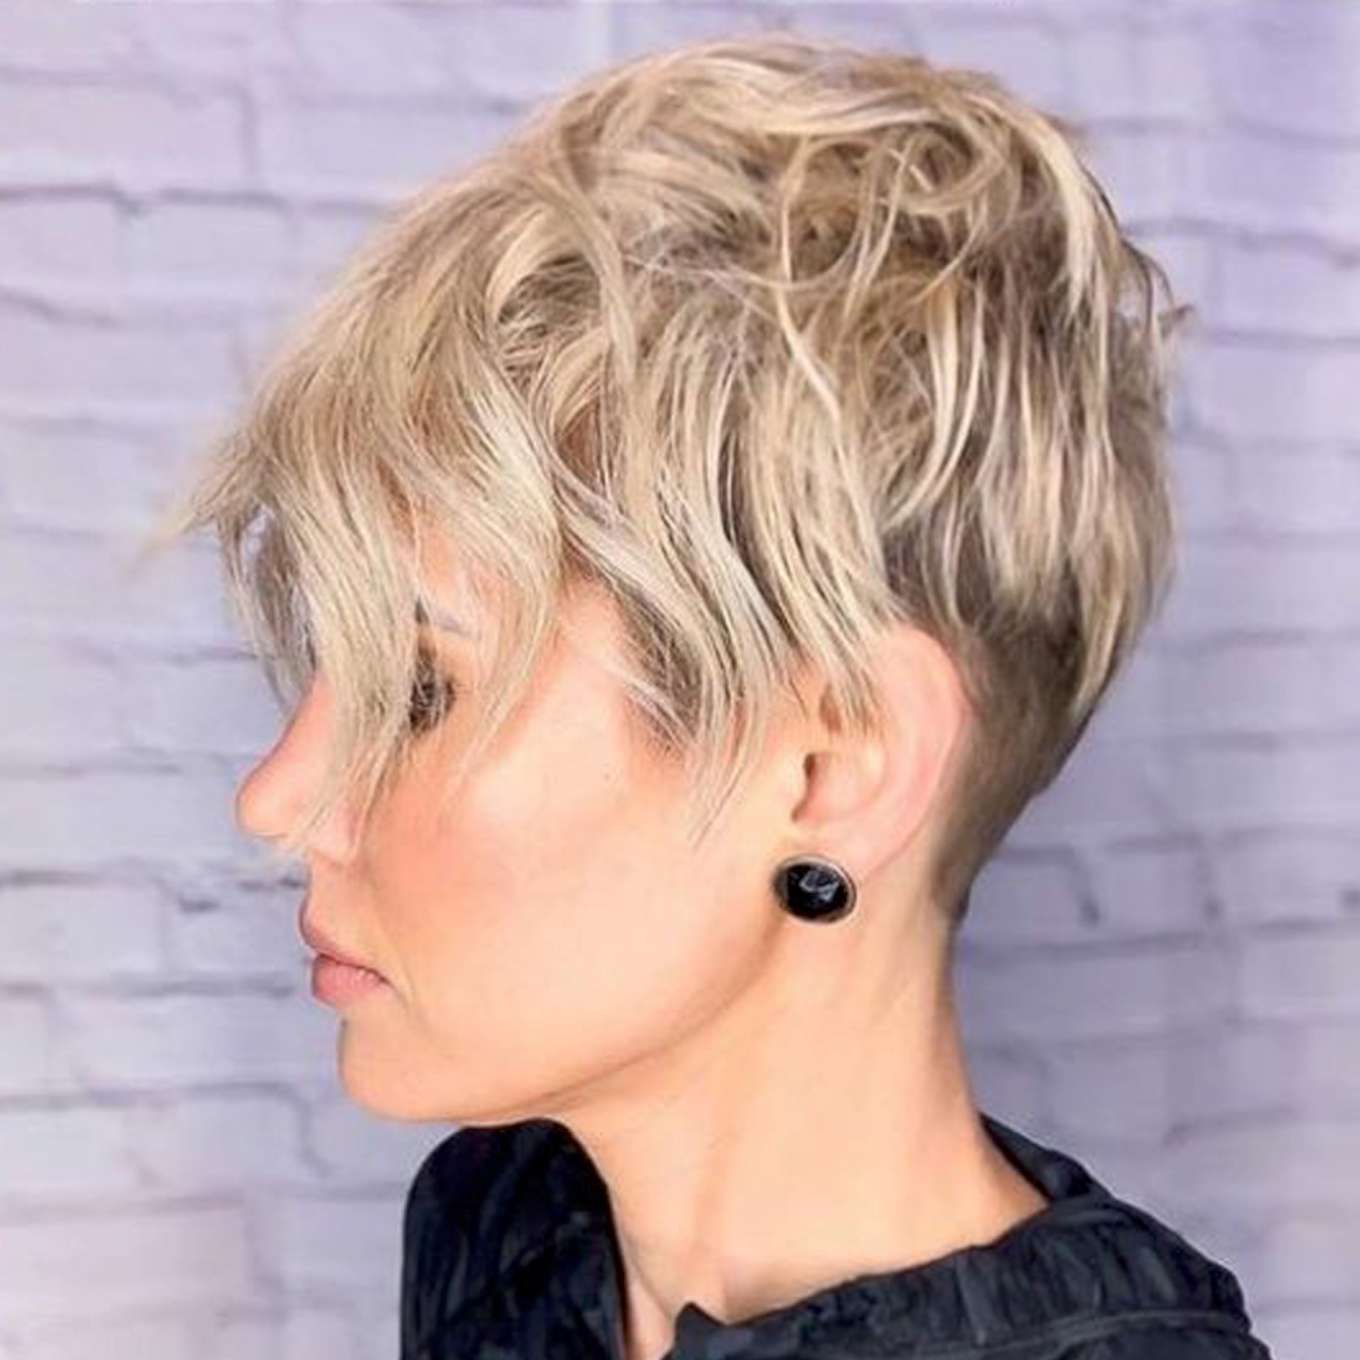 Sofia Rogers Short Hairstyles – 2